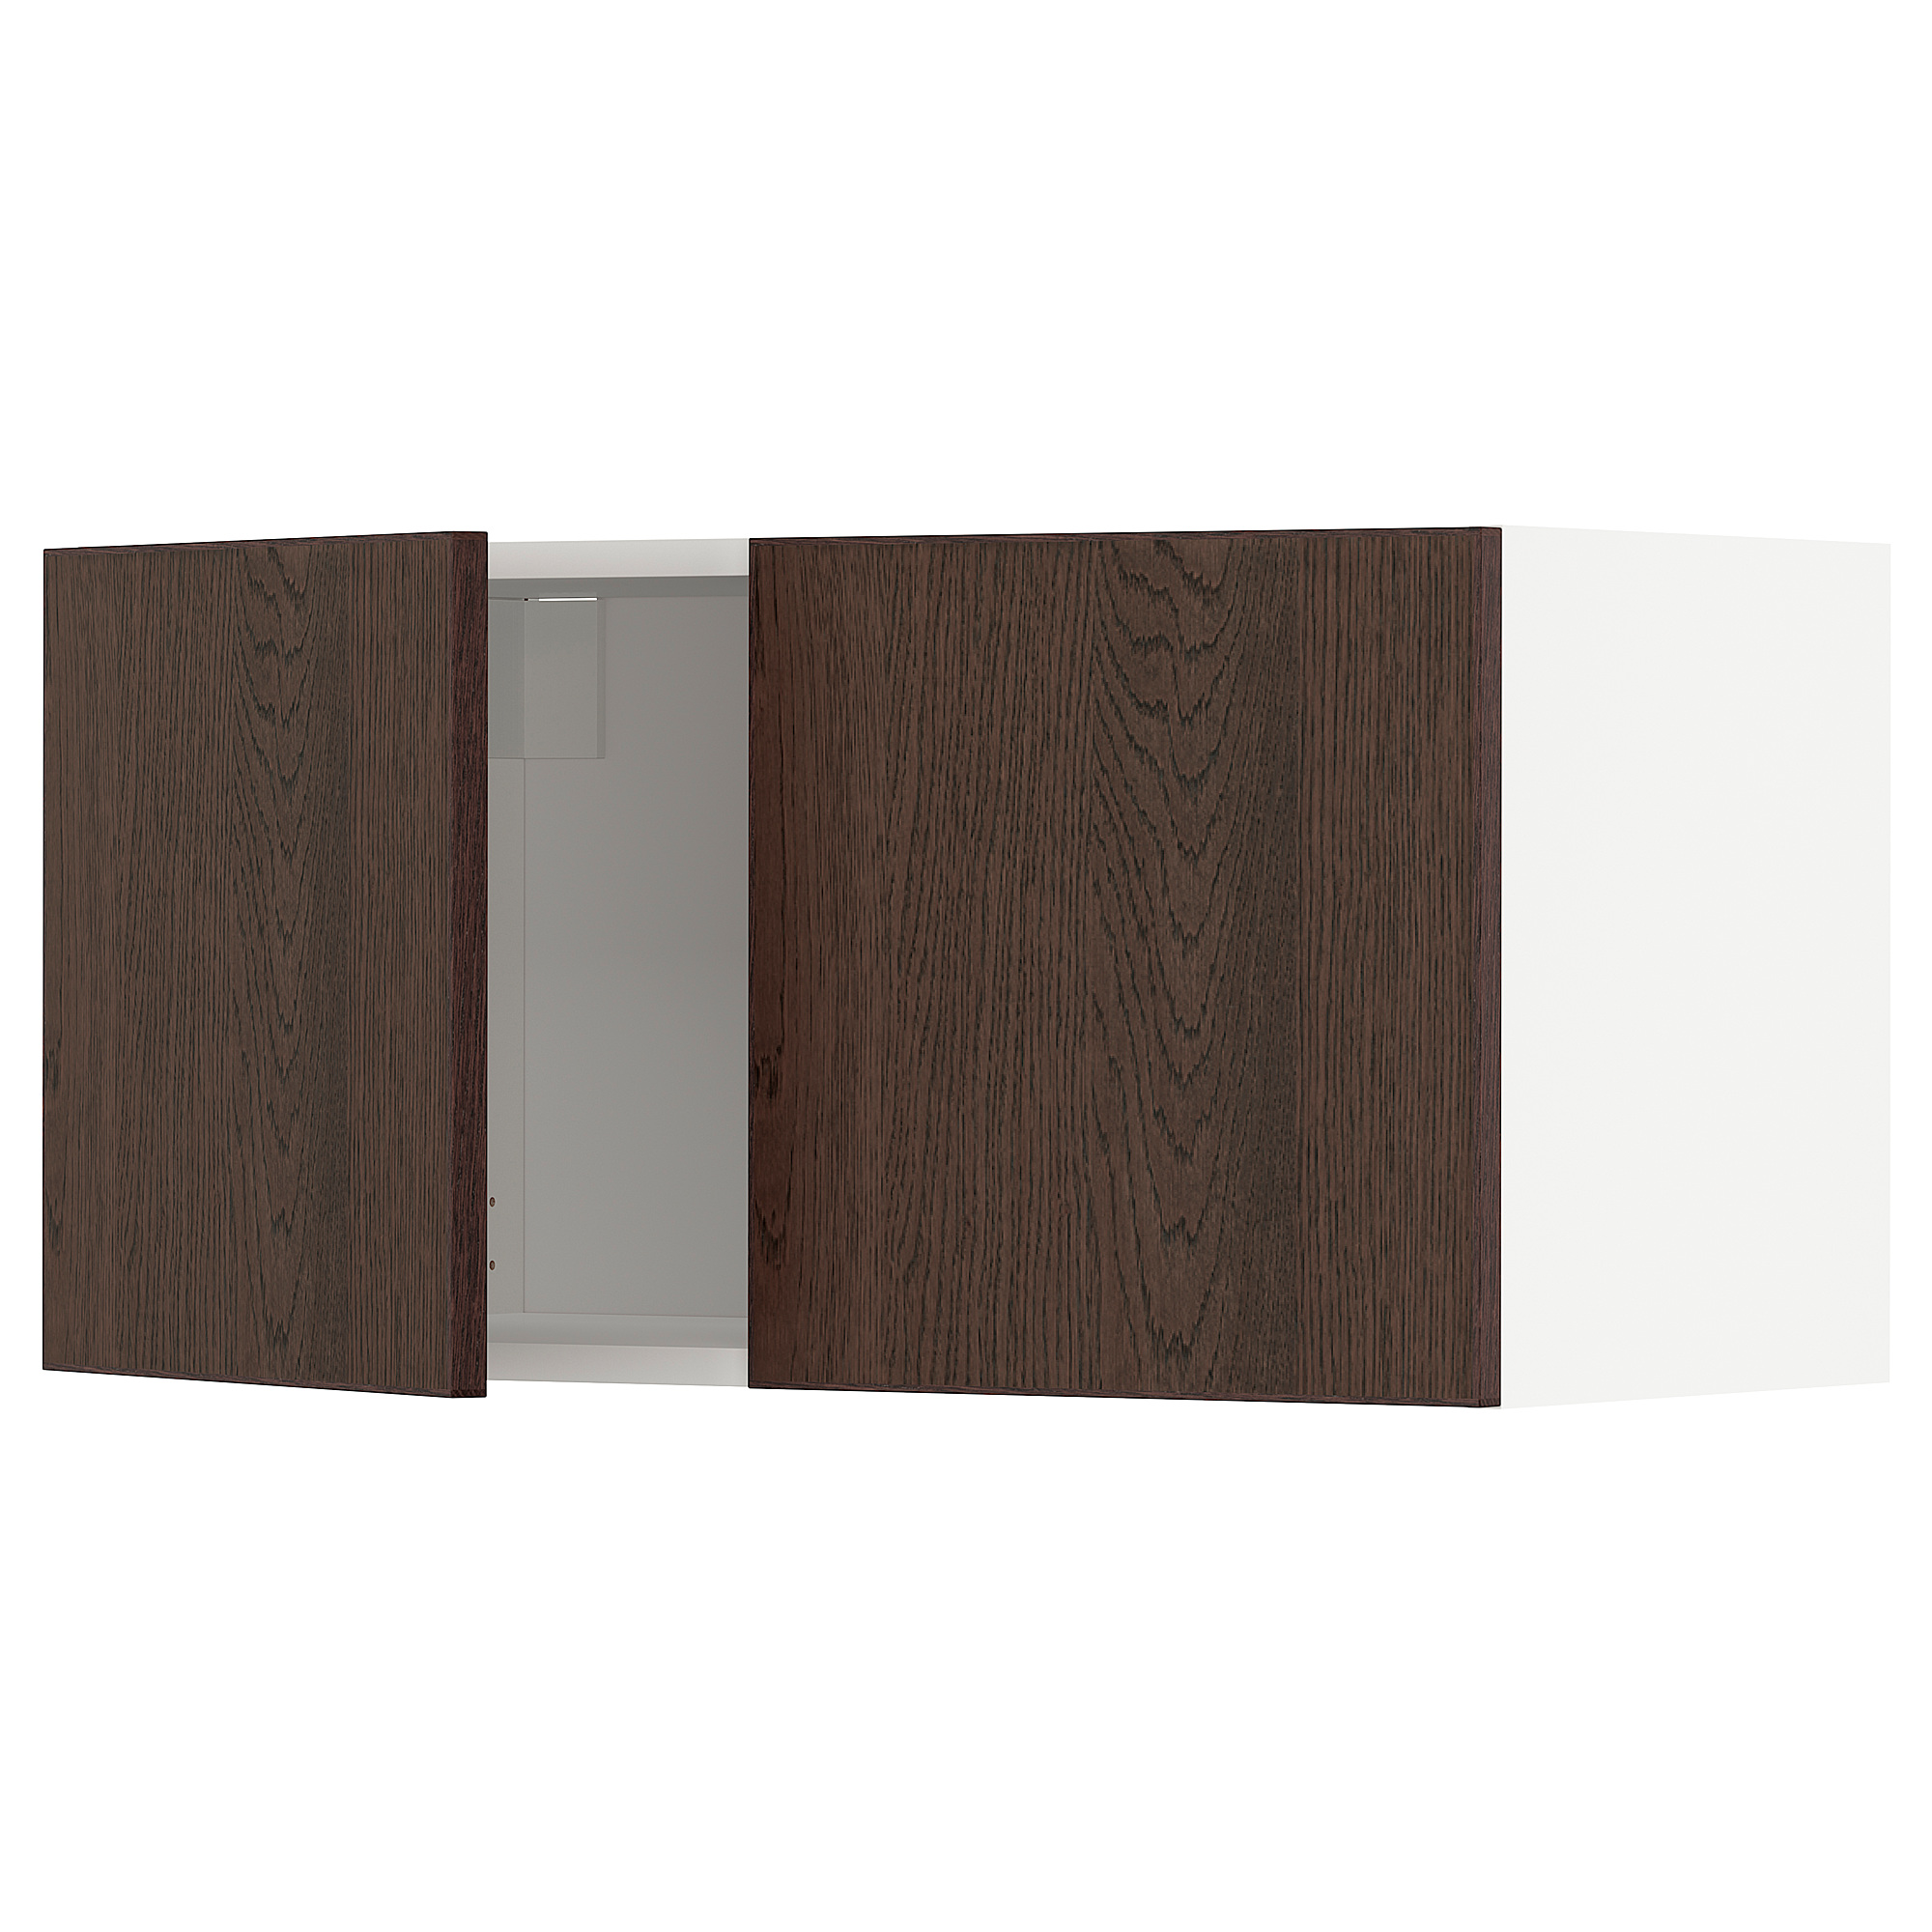 METOD wall cabinet with 2 doors